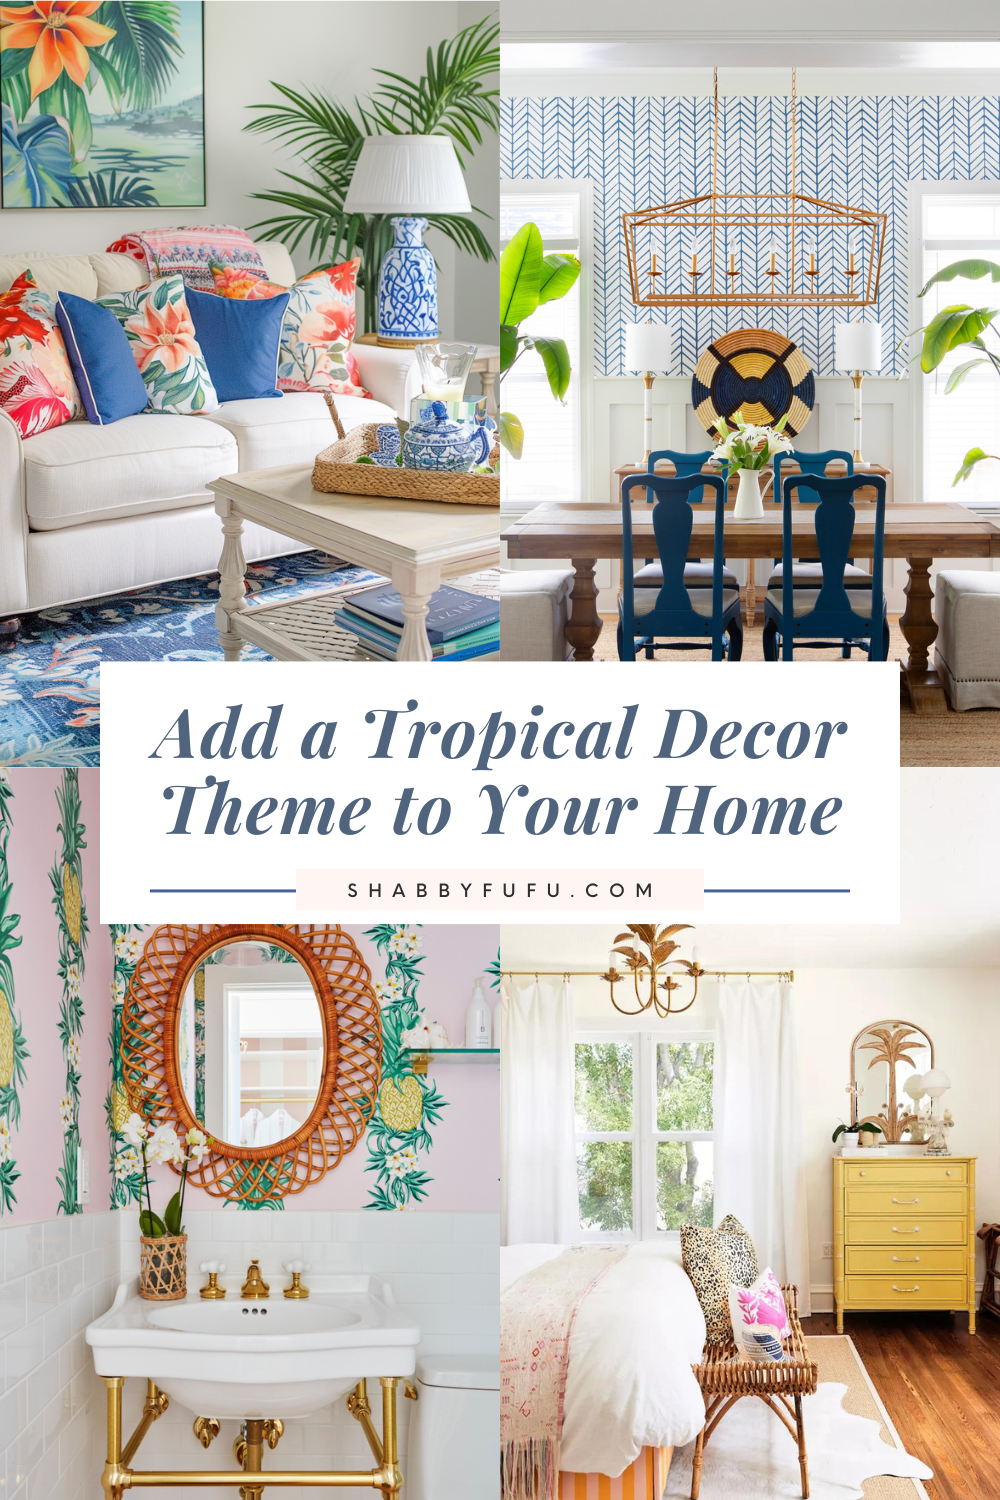 Pinterest decorative graphic titled "Add a Tropical Decor Theme to Your Home"